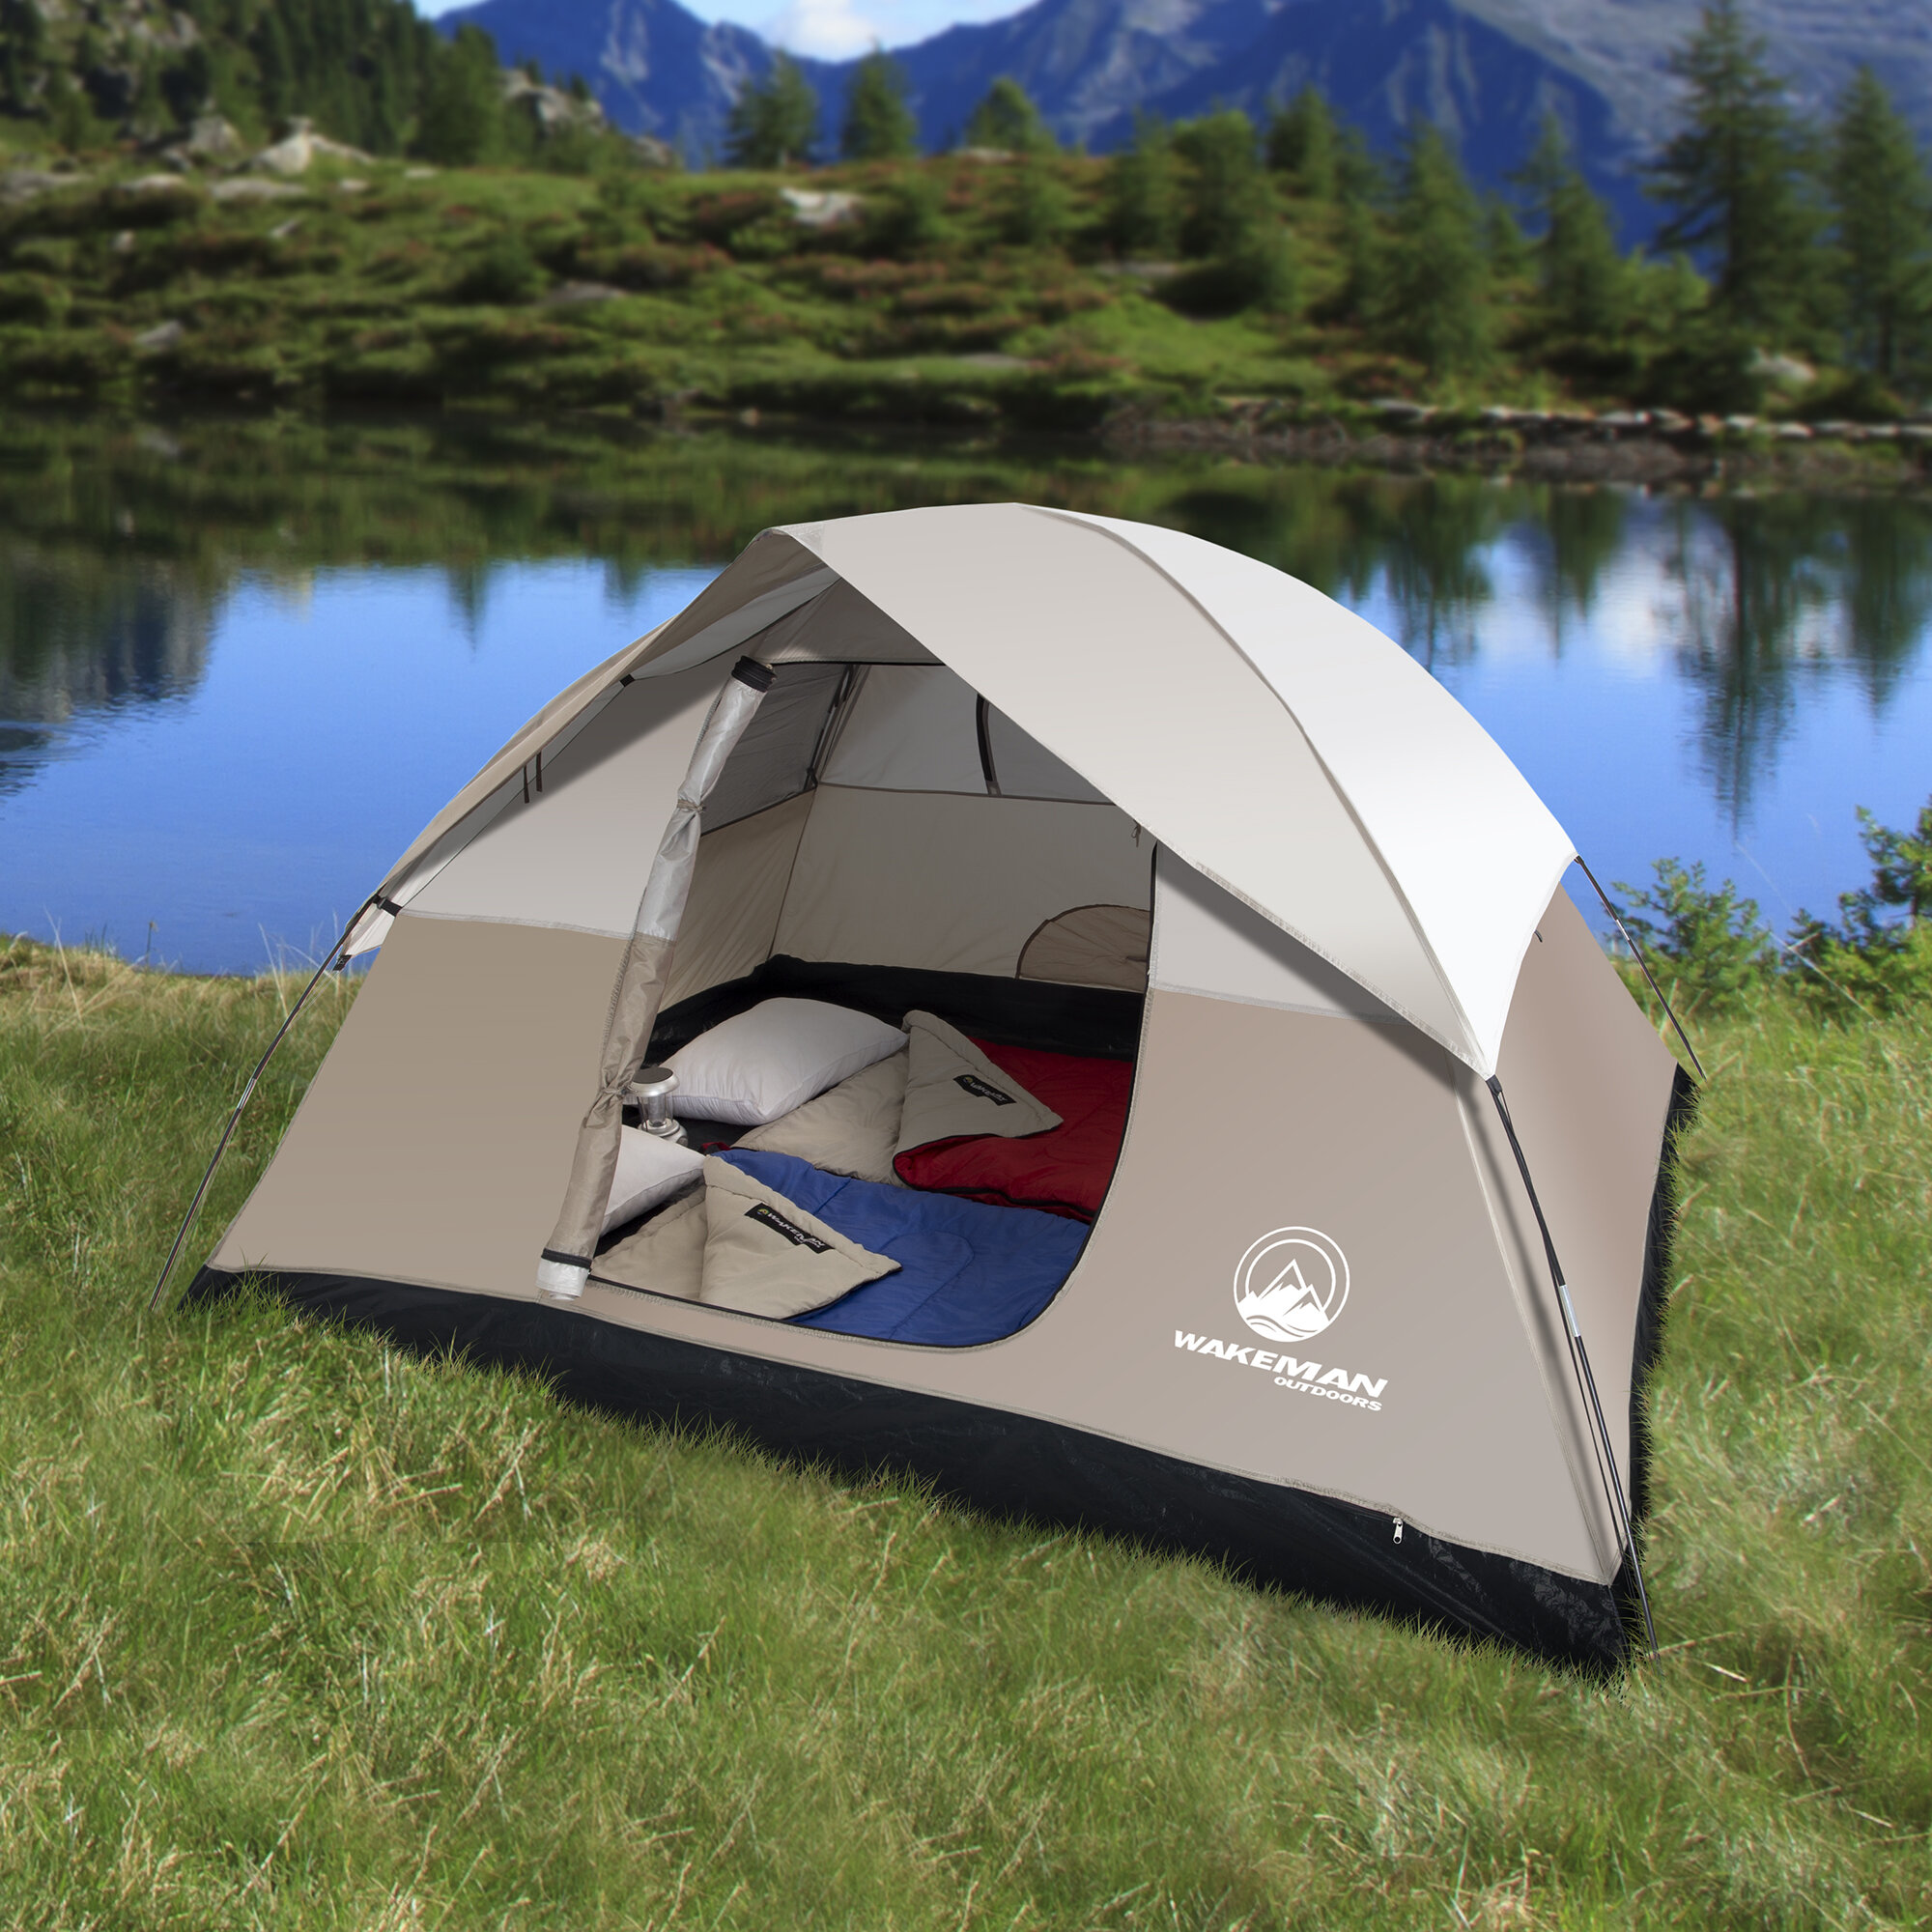 [BIG SALE] Camping Tents & Shelters Under $99 You’ll Love In 2022 | Wayfair